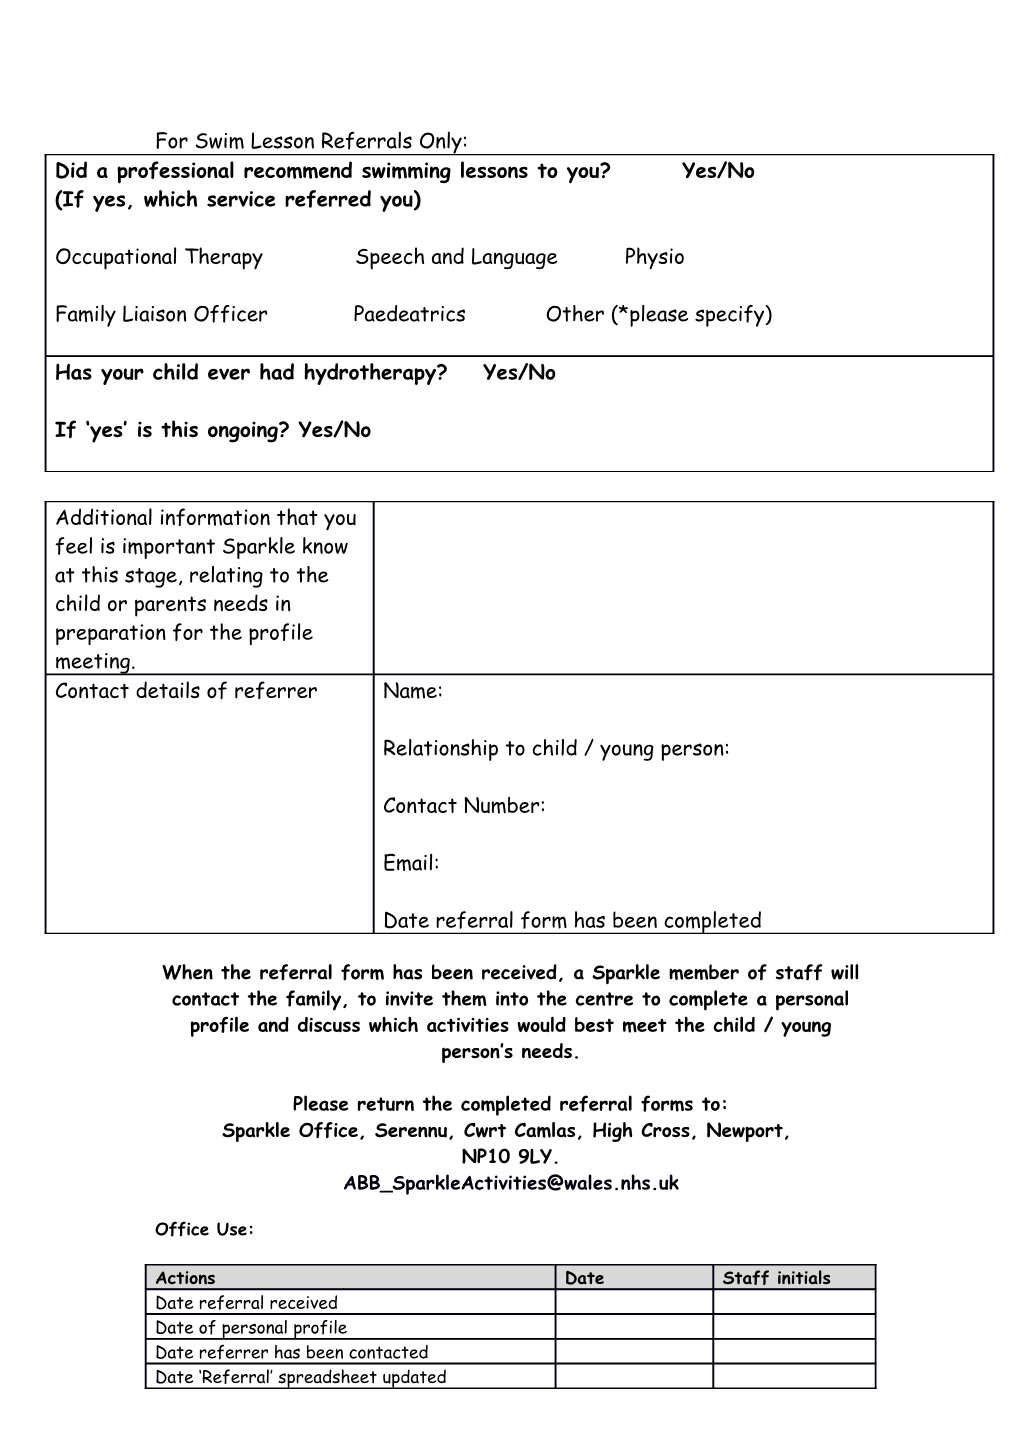 *Referral Form for Leisure Activities